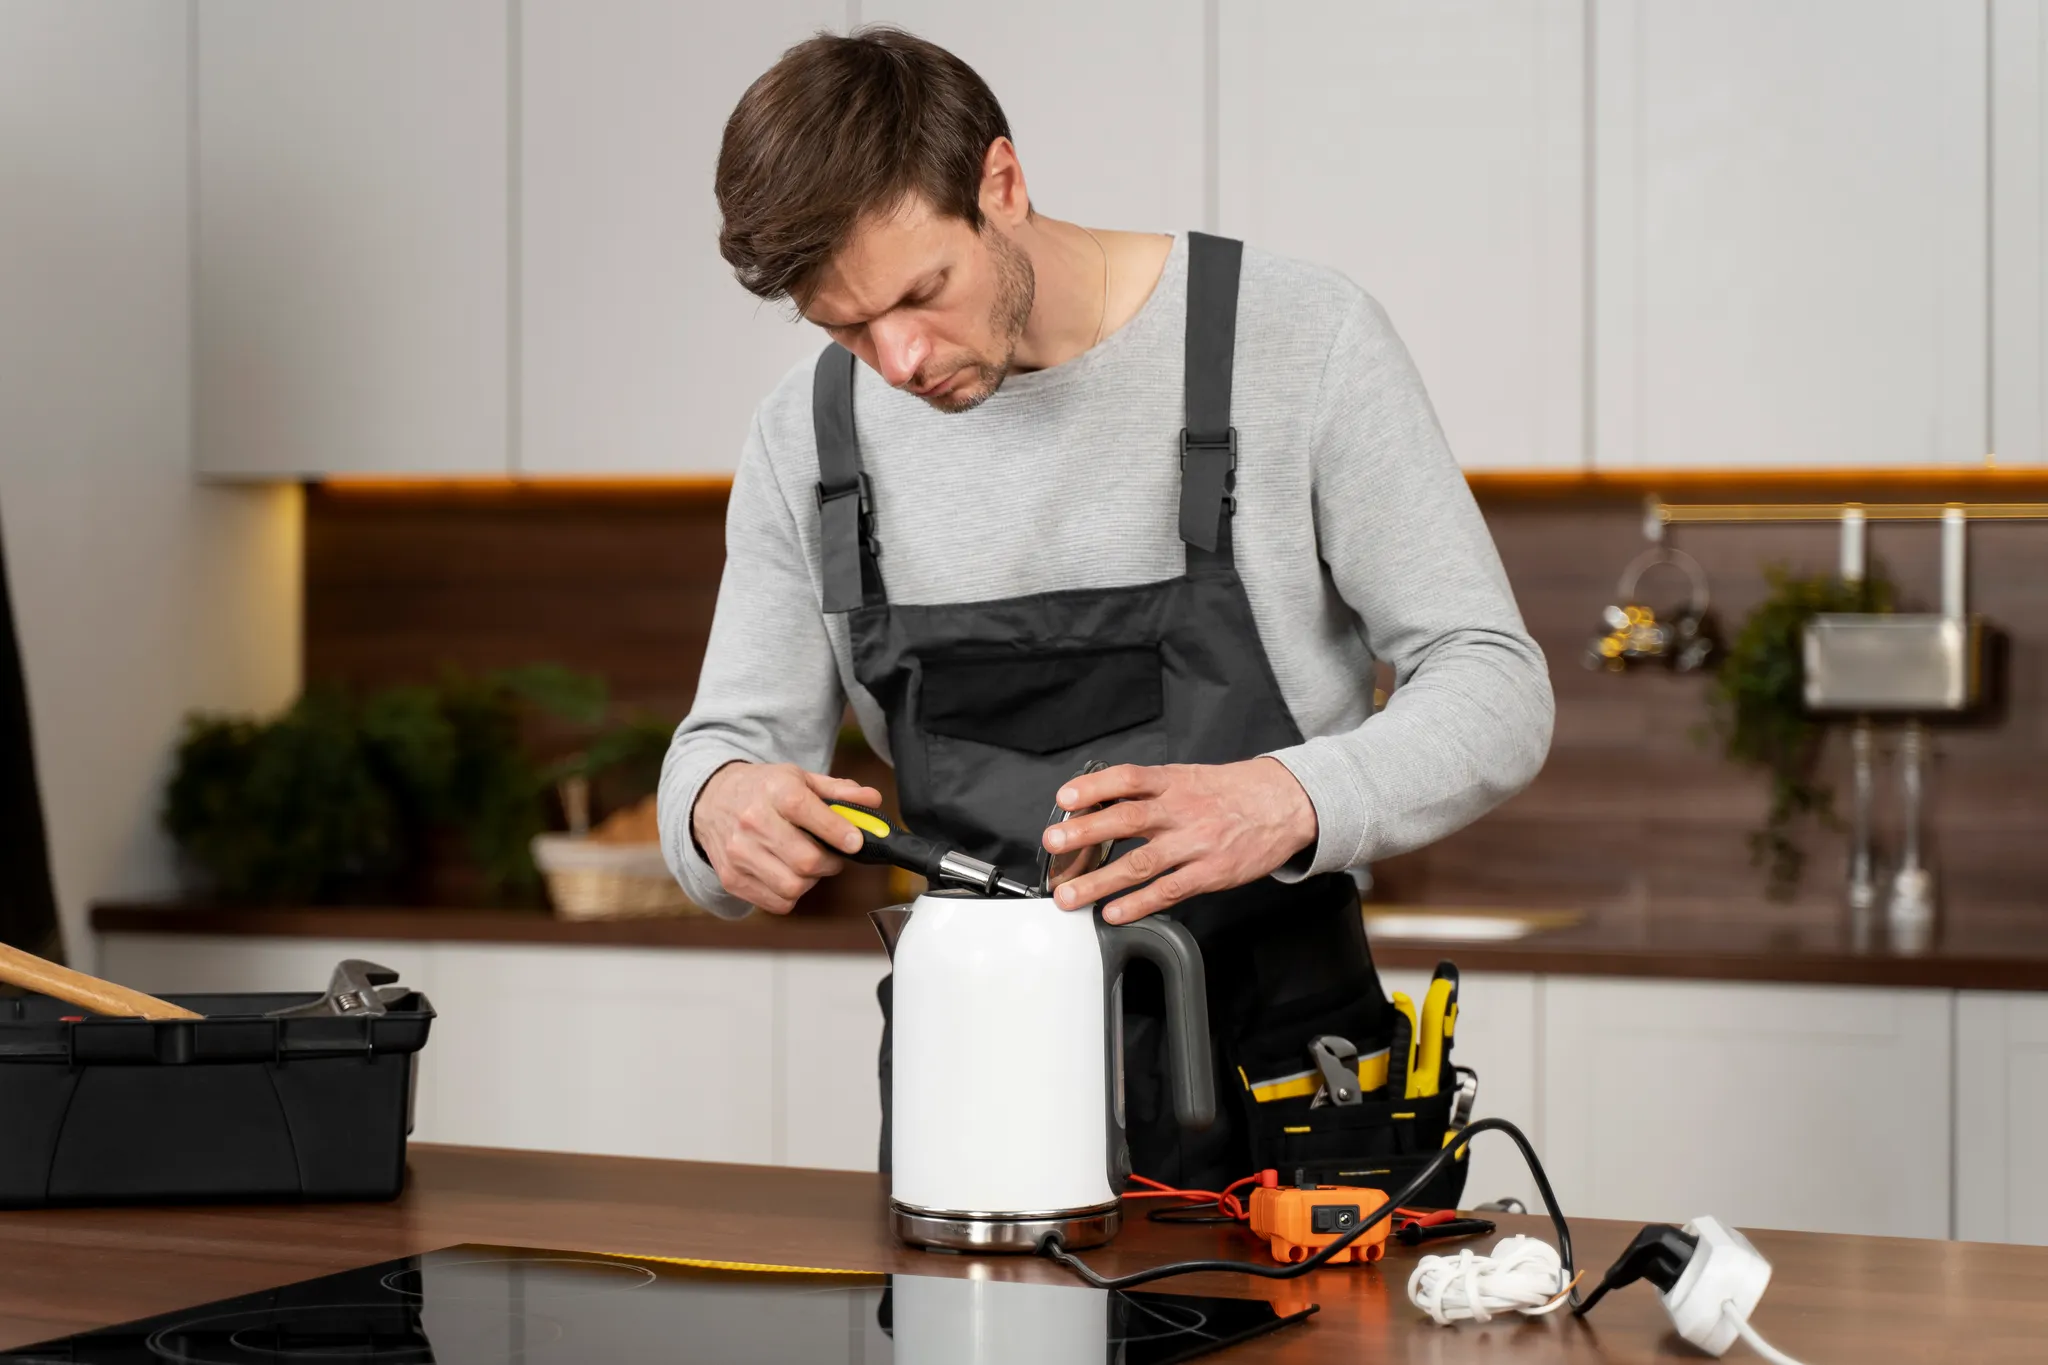 Electrician Repairing A Kettle